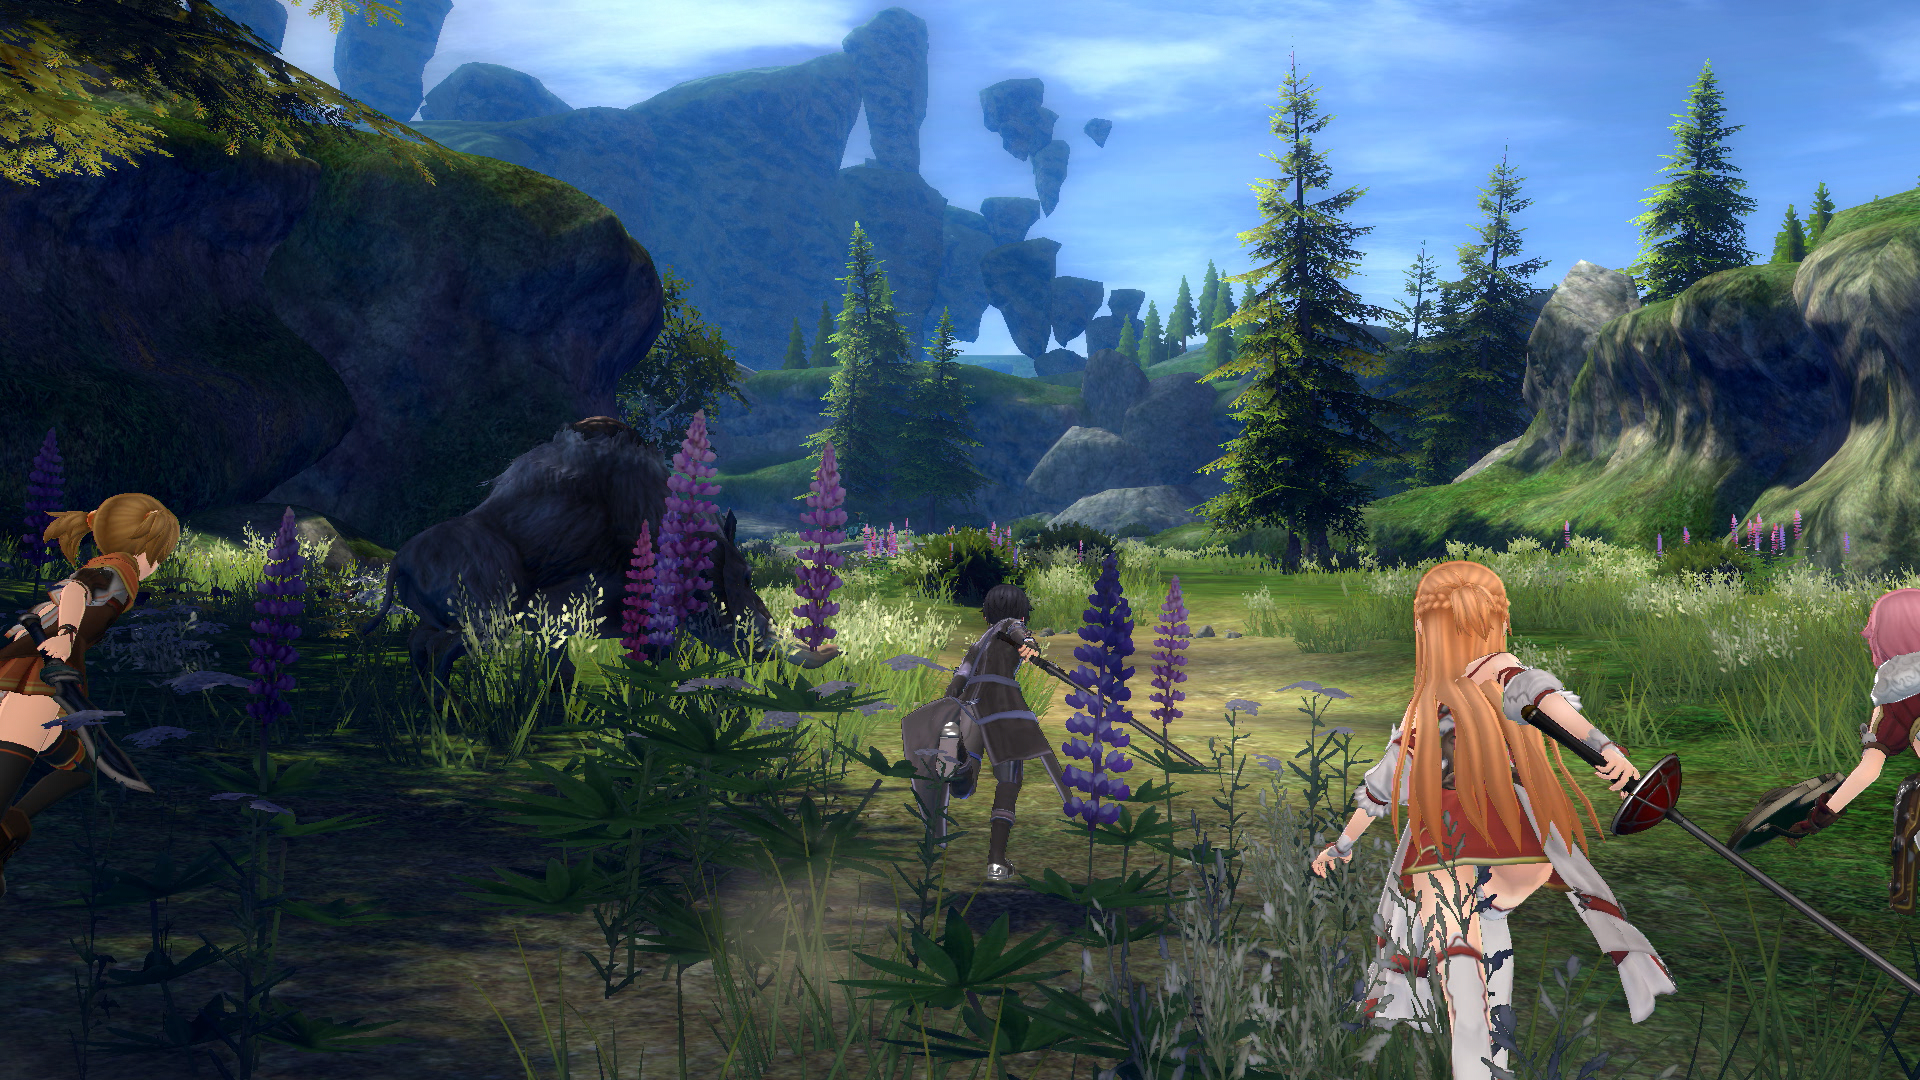 Sword Art Online: Hollow Realization Coming To North America - 2015-12-23 08:36:45